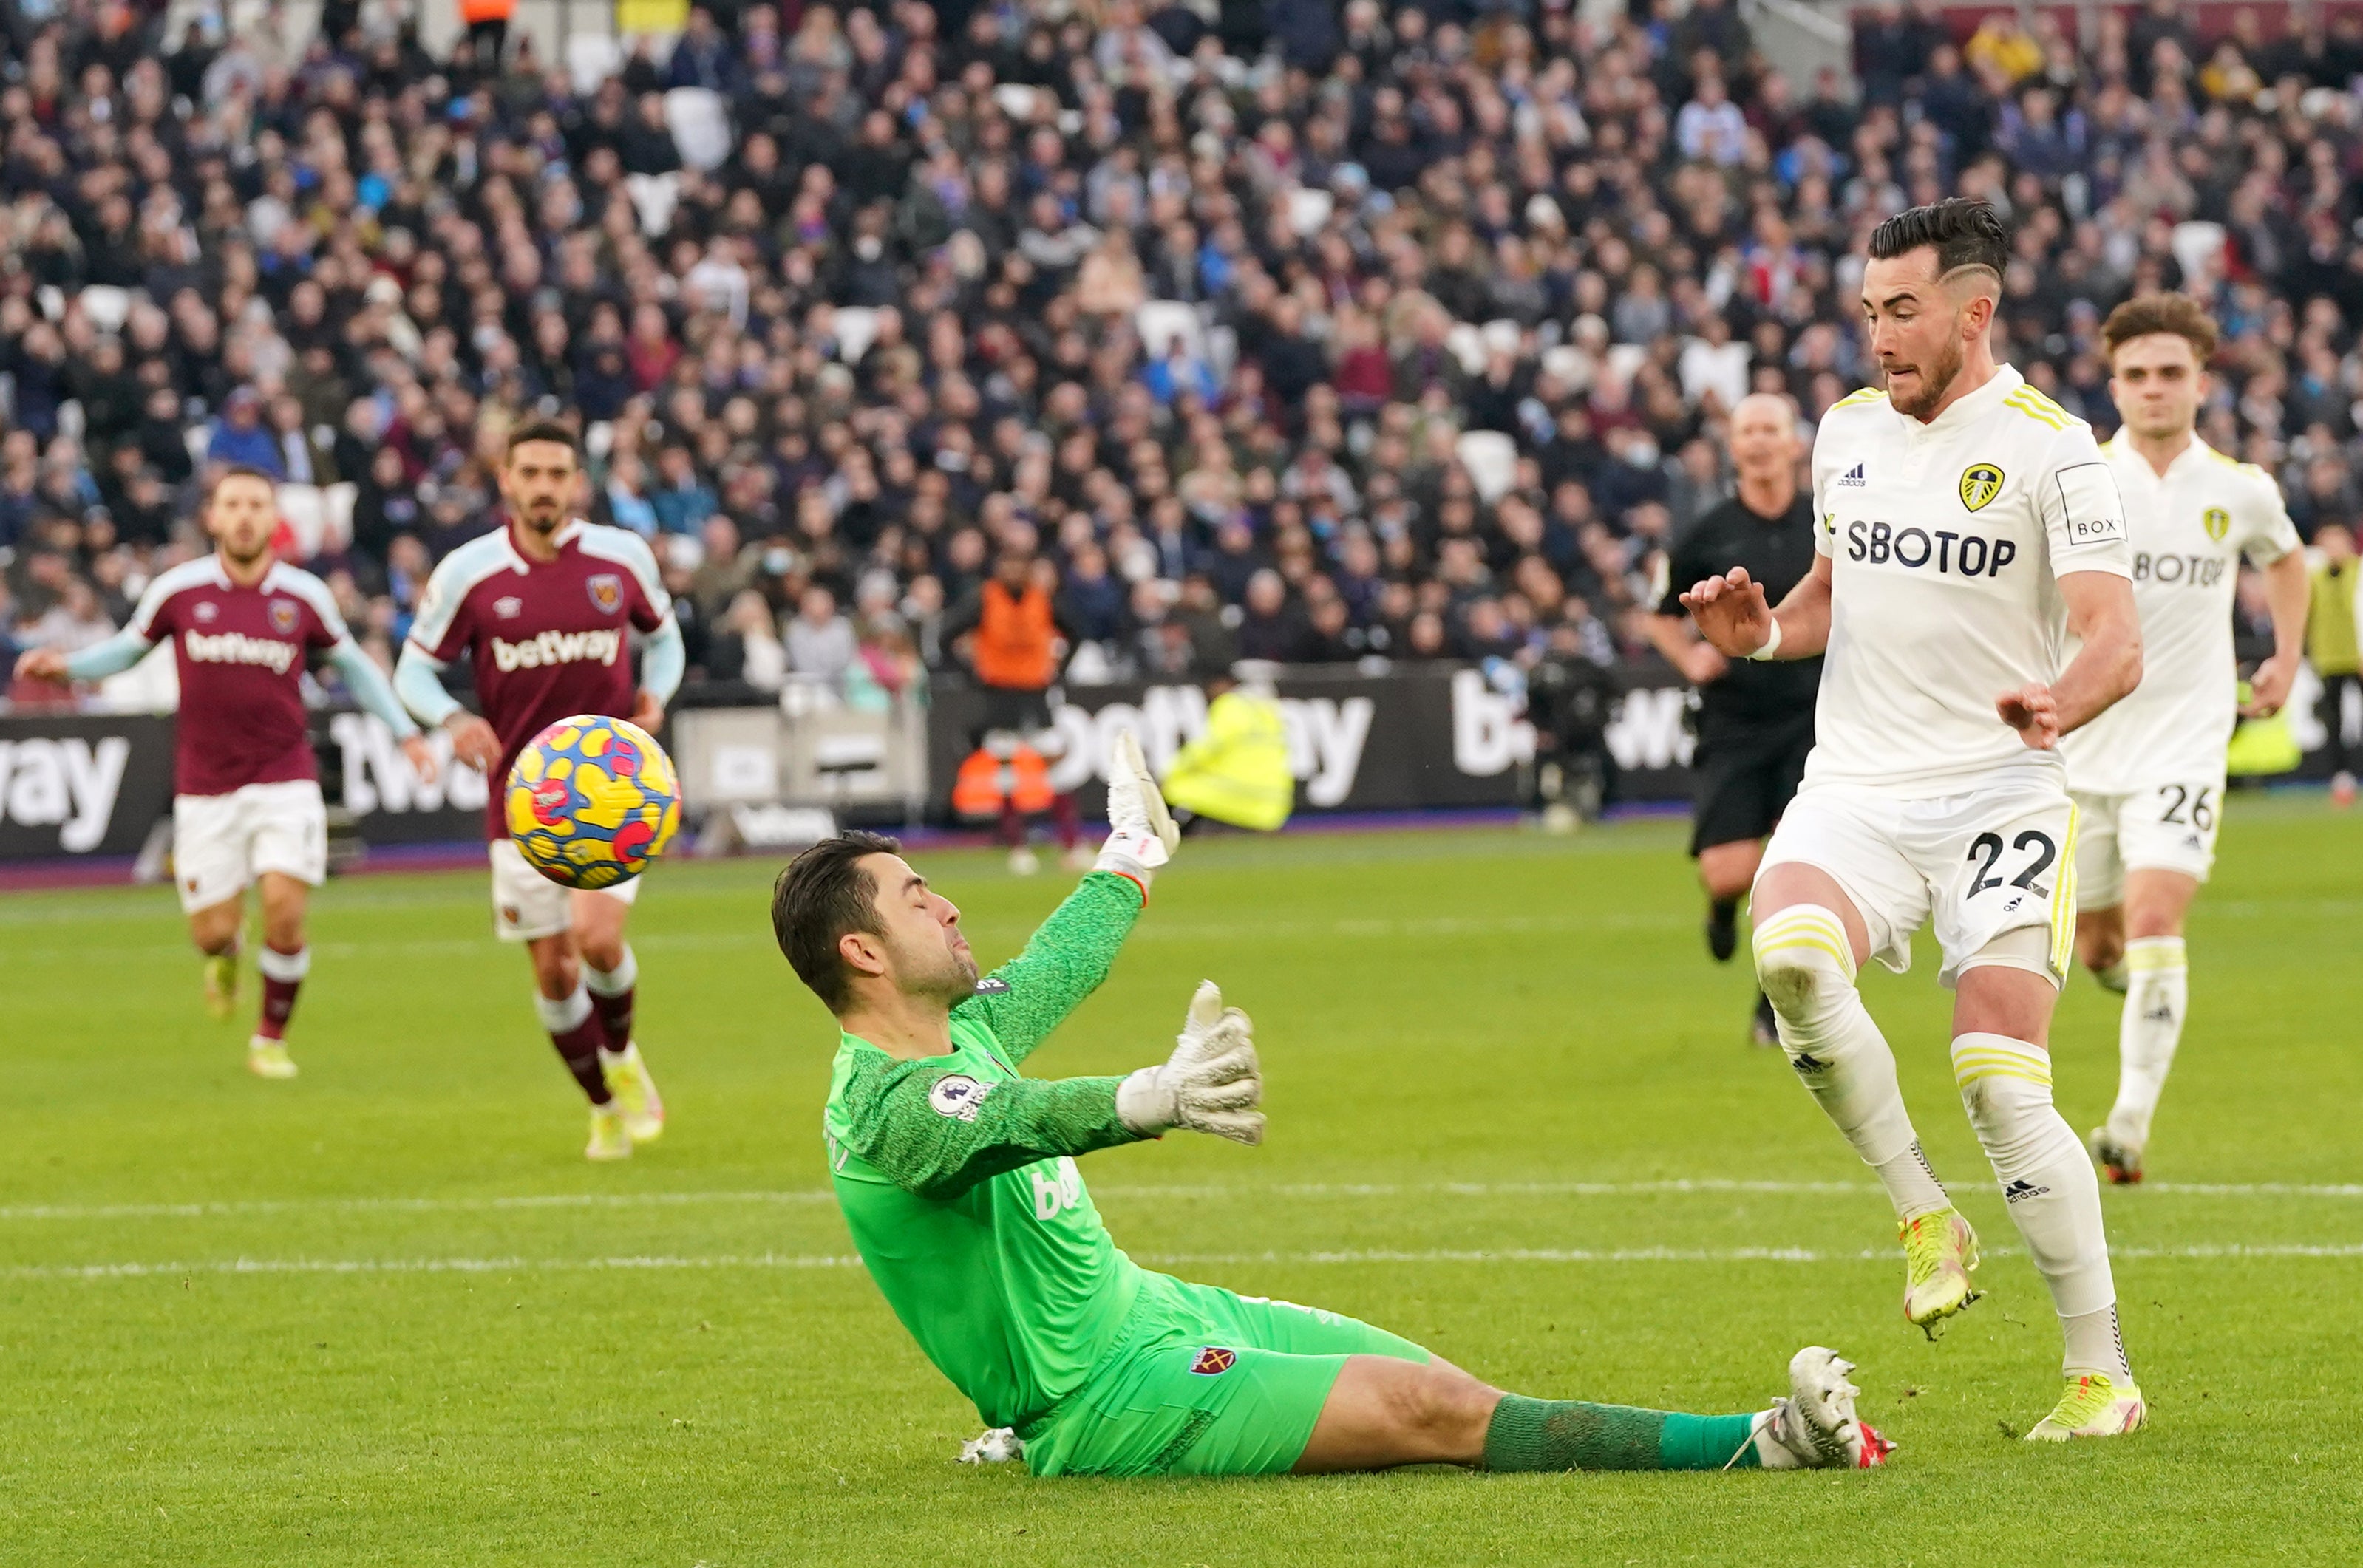 Jack Harrison (right) claims his first career hat-trick with his third goal in Leeds’ 3-2 win at West Ham (Jonathan Brady/PA)